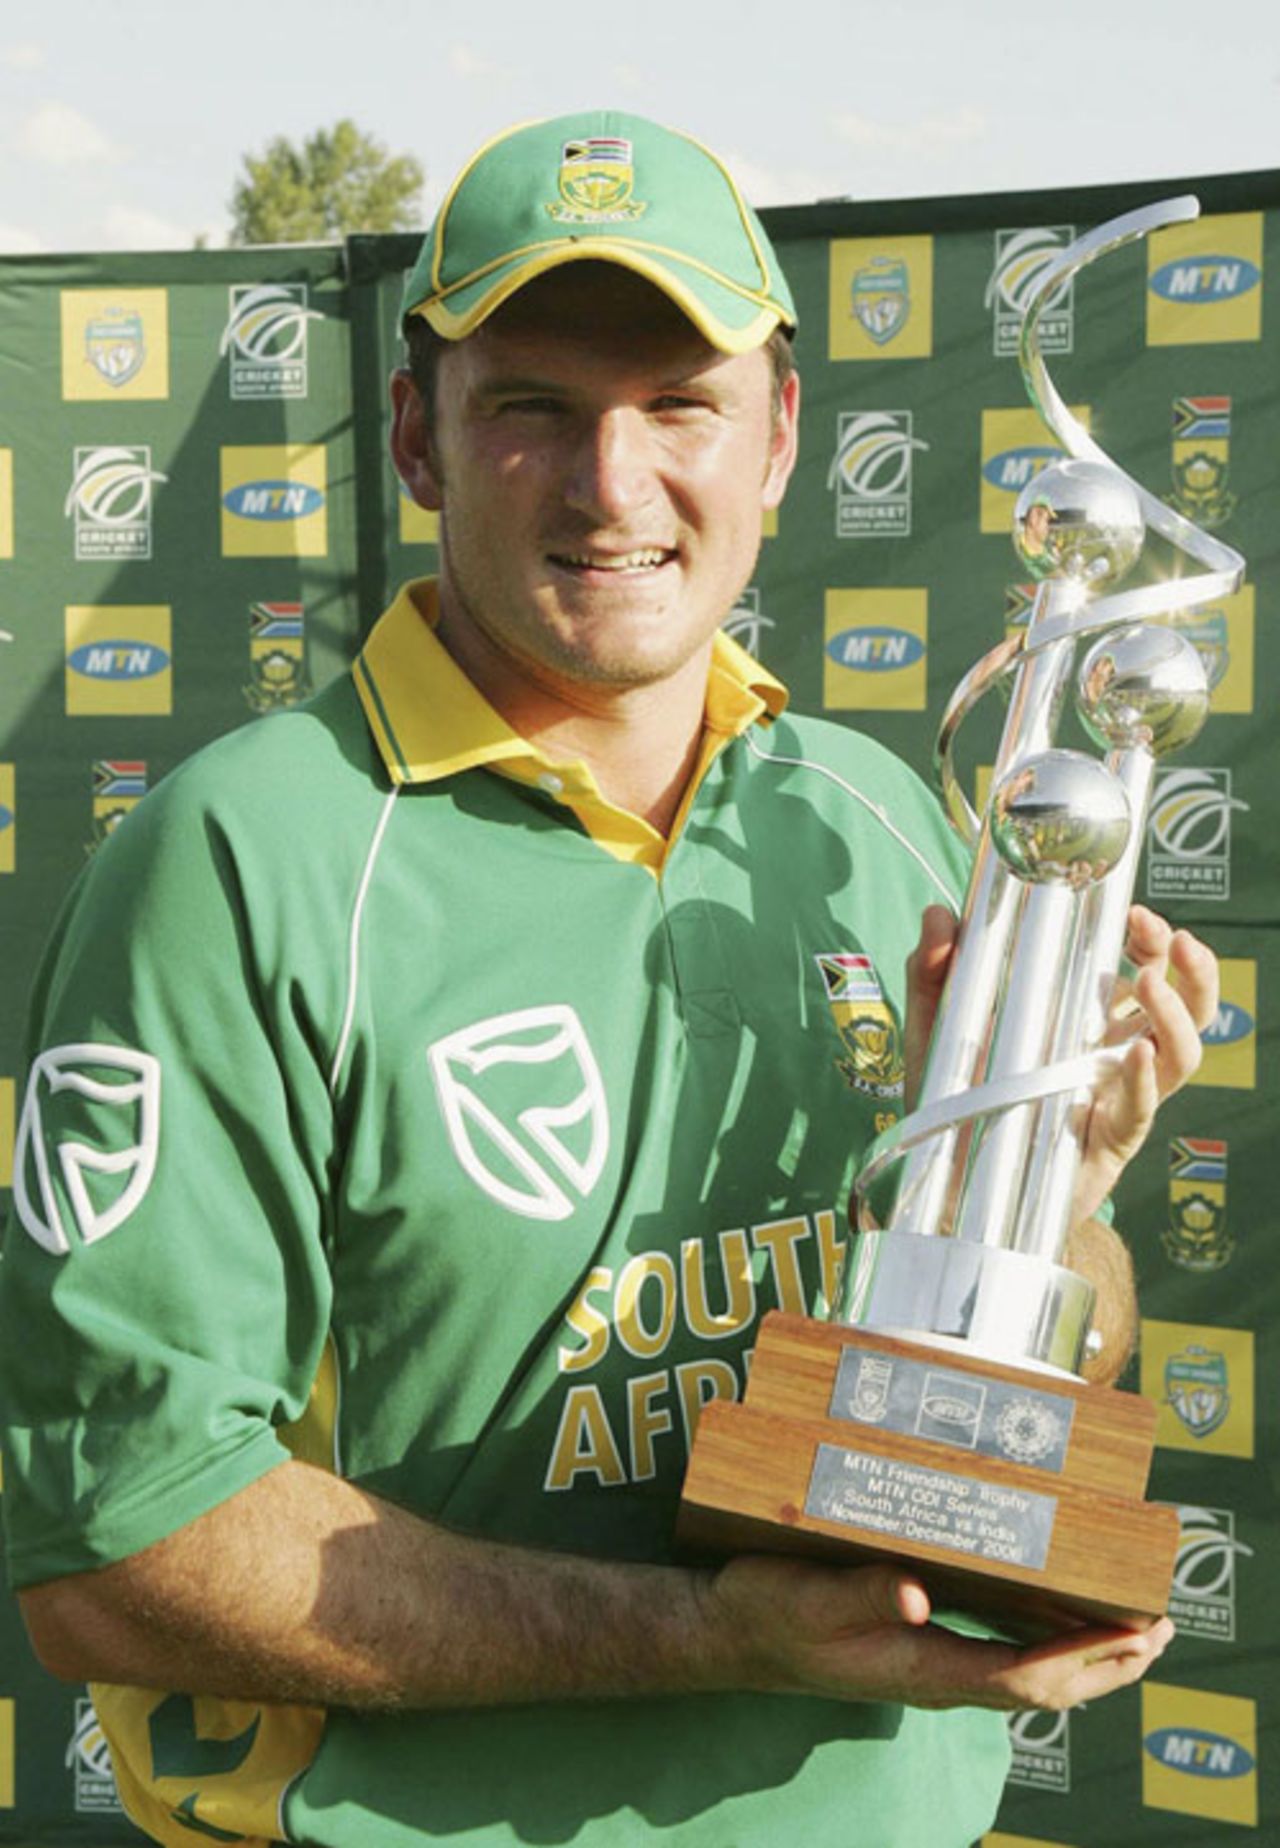 Graeme Smith with the series trophy after a 4-0 whitewash, South Africa v India, 5th ODI, Centurion, December 3, 2006